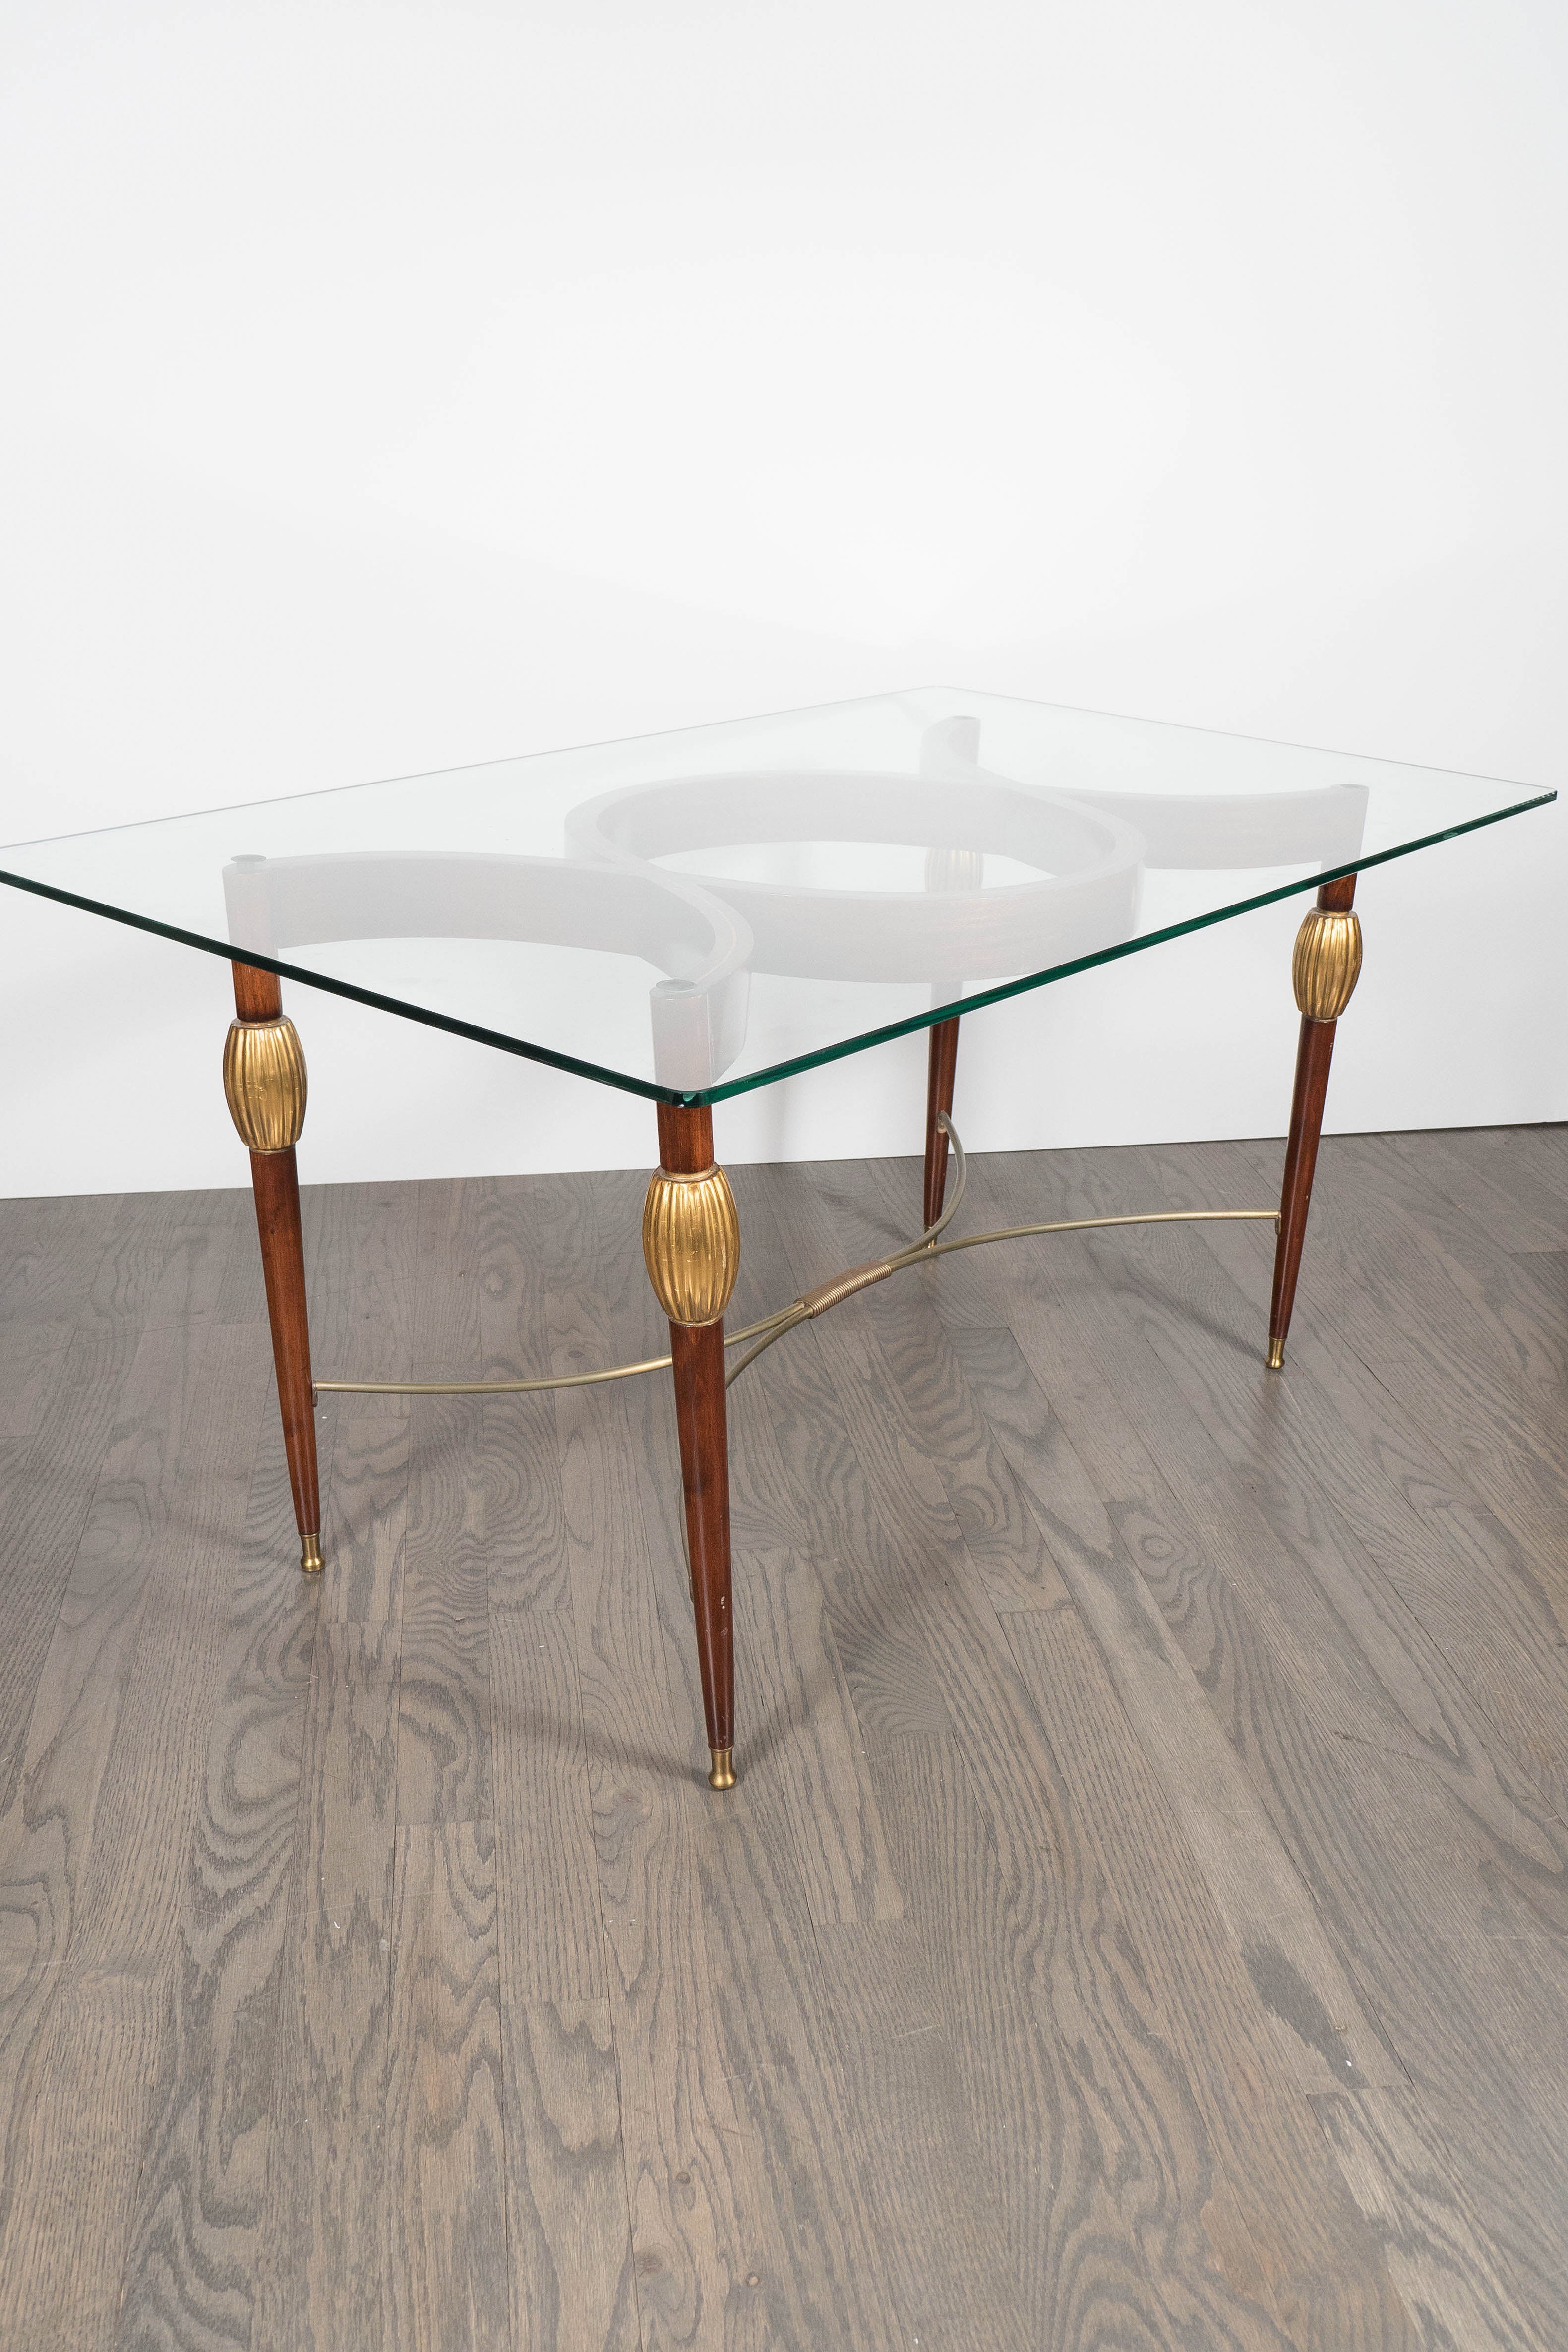 Mid-20th Century Mid-Century Modern Italian Cocktail Table in the Style of Gio Ponti, circa 1945